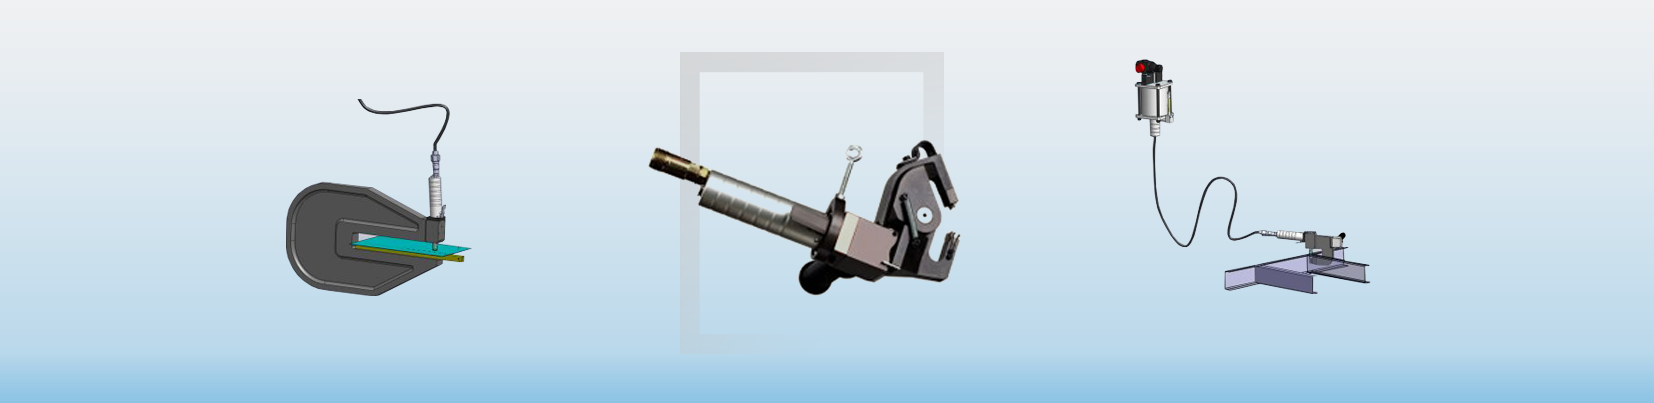 Clinching Machines And Tools